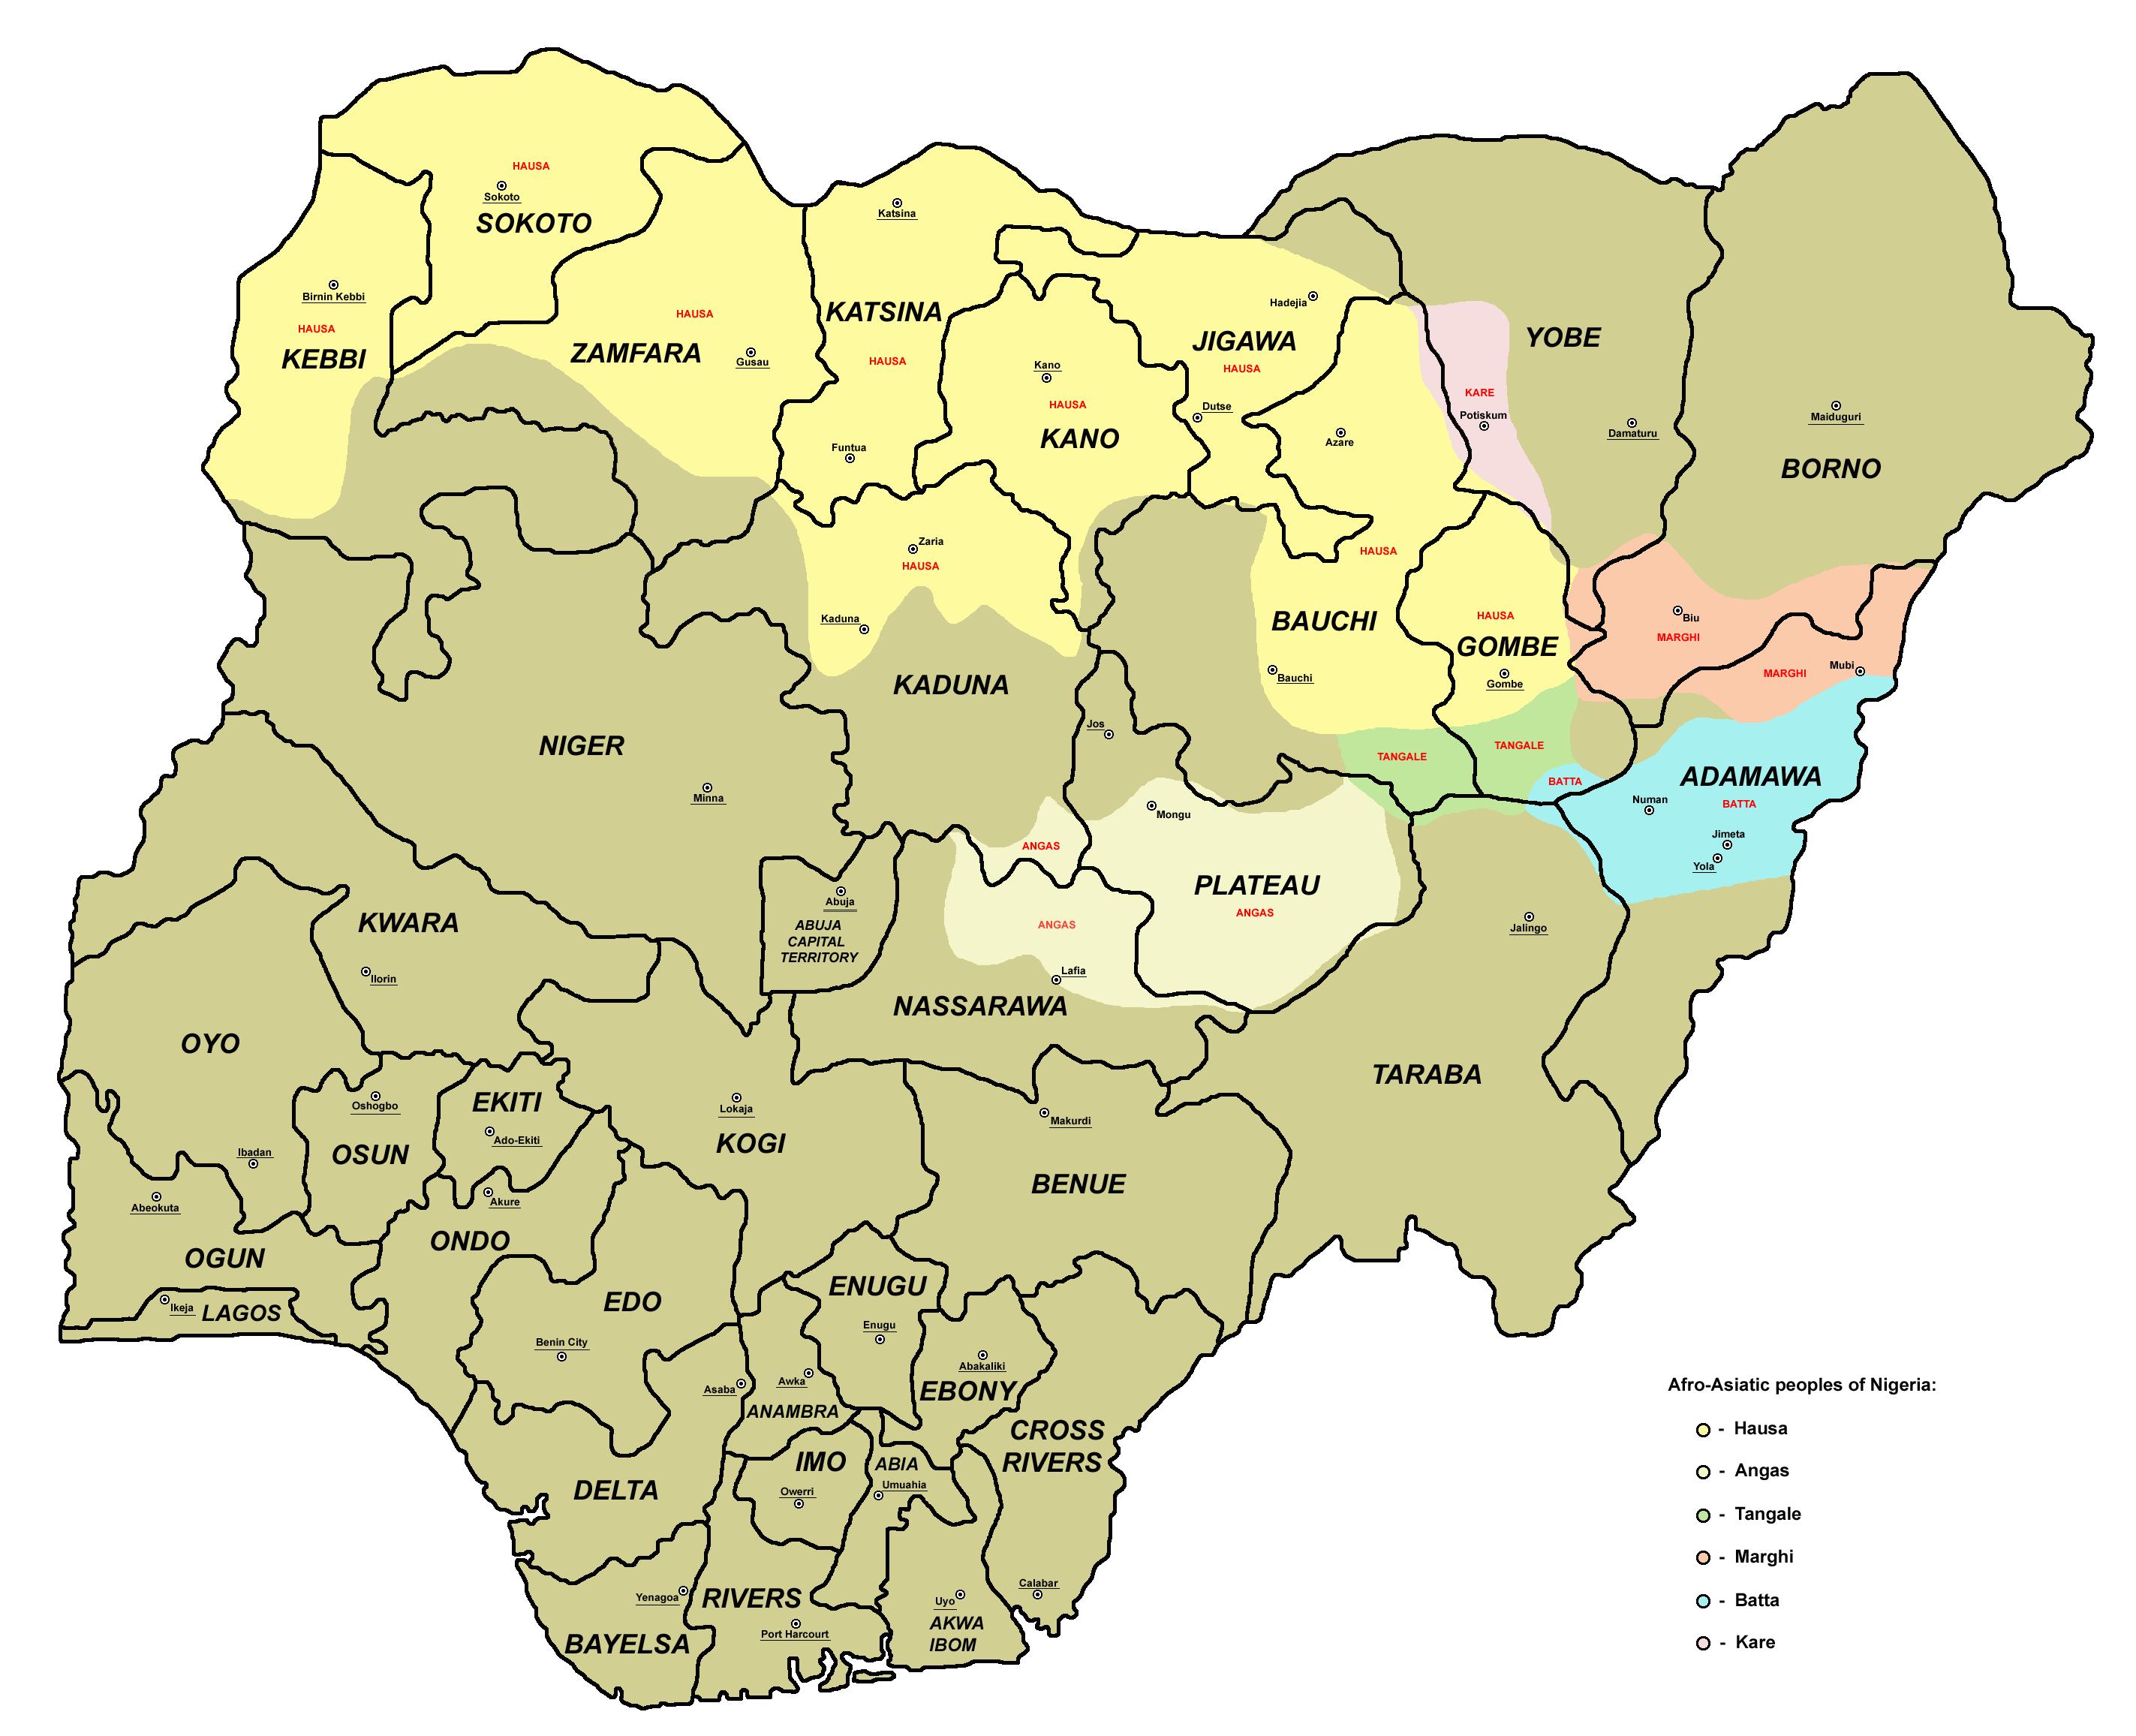 map-of-nigeria-with-36-states-and-capitals-map-of-nigeria-showing-the